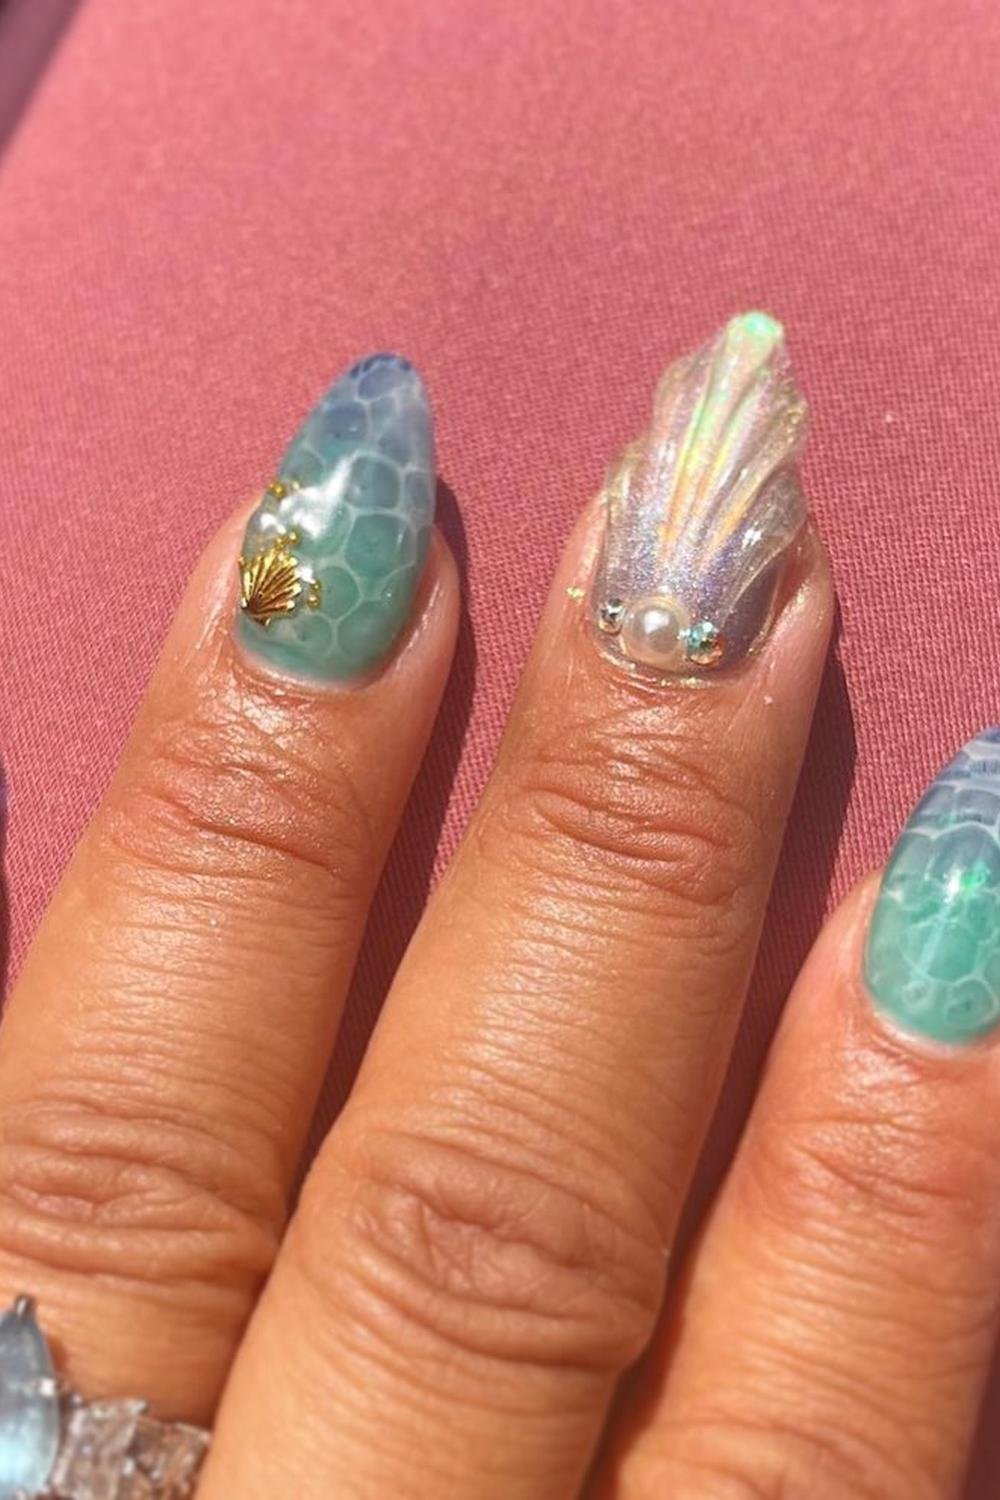 22 - Picture of Mermaid Nails